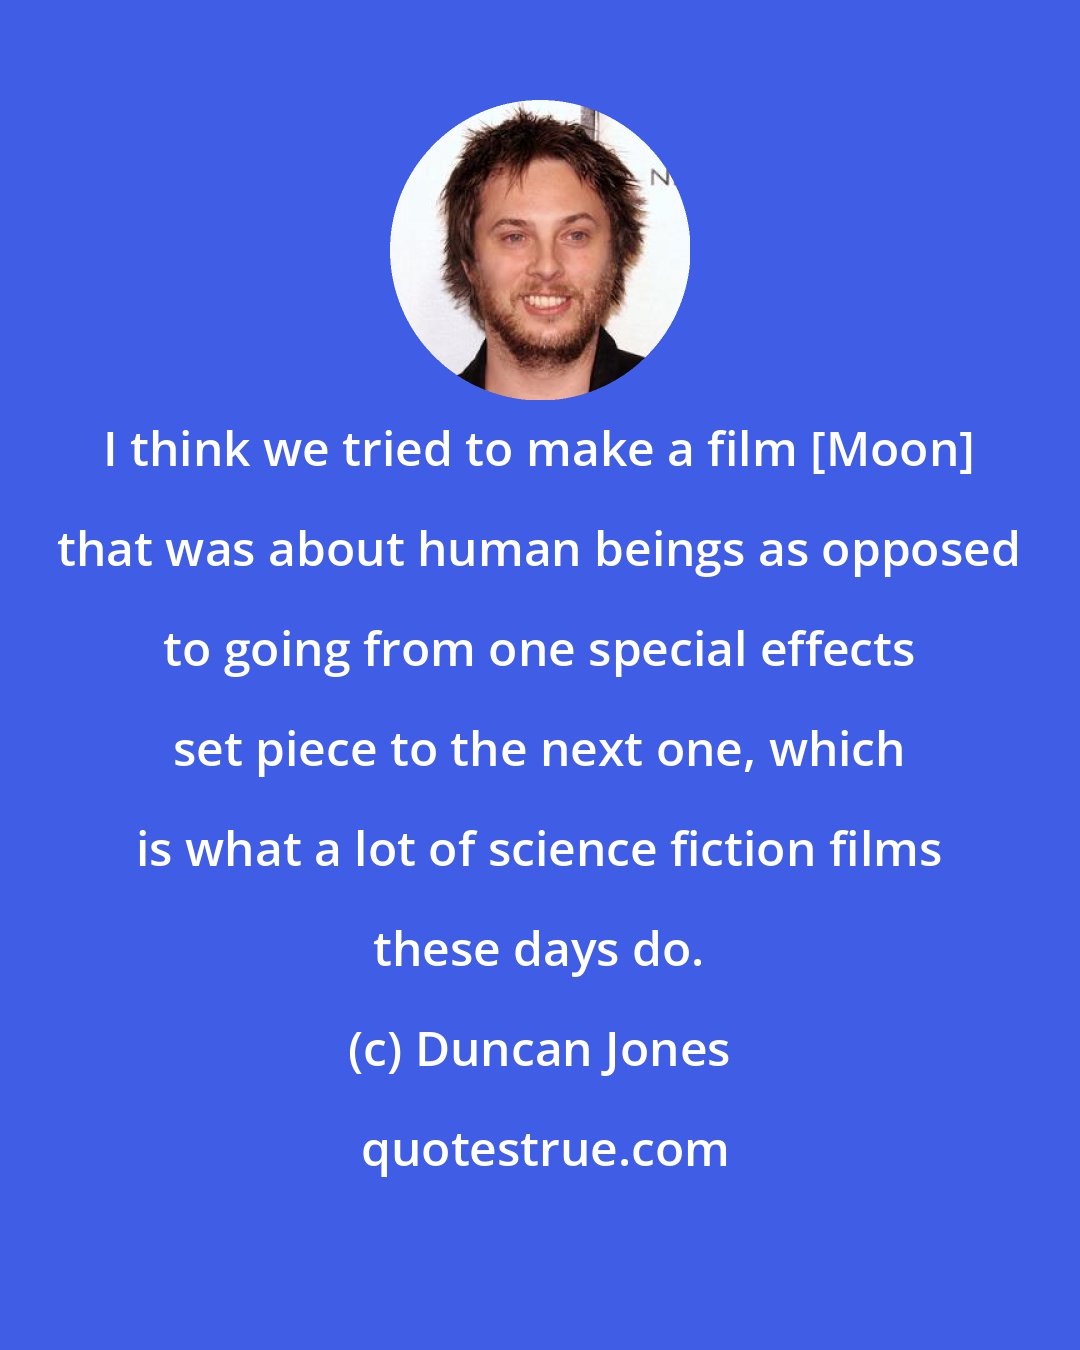 Duncan Jones: I think we tried to make a film [Moon] that was about human beings as opposed to going from one special effects set piece to the next one, which is what a lot of science fiction films these days do.